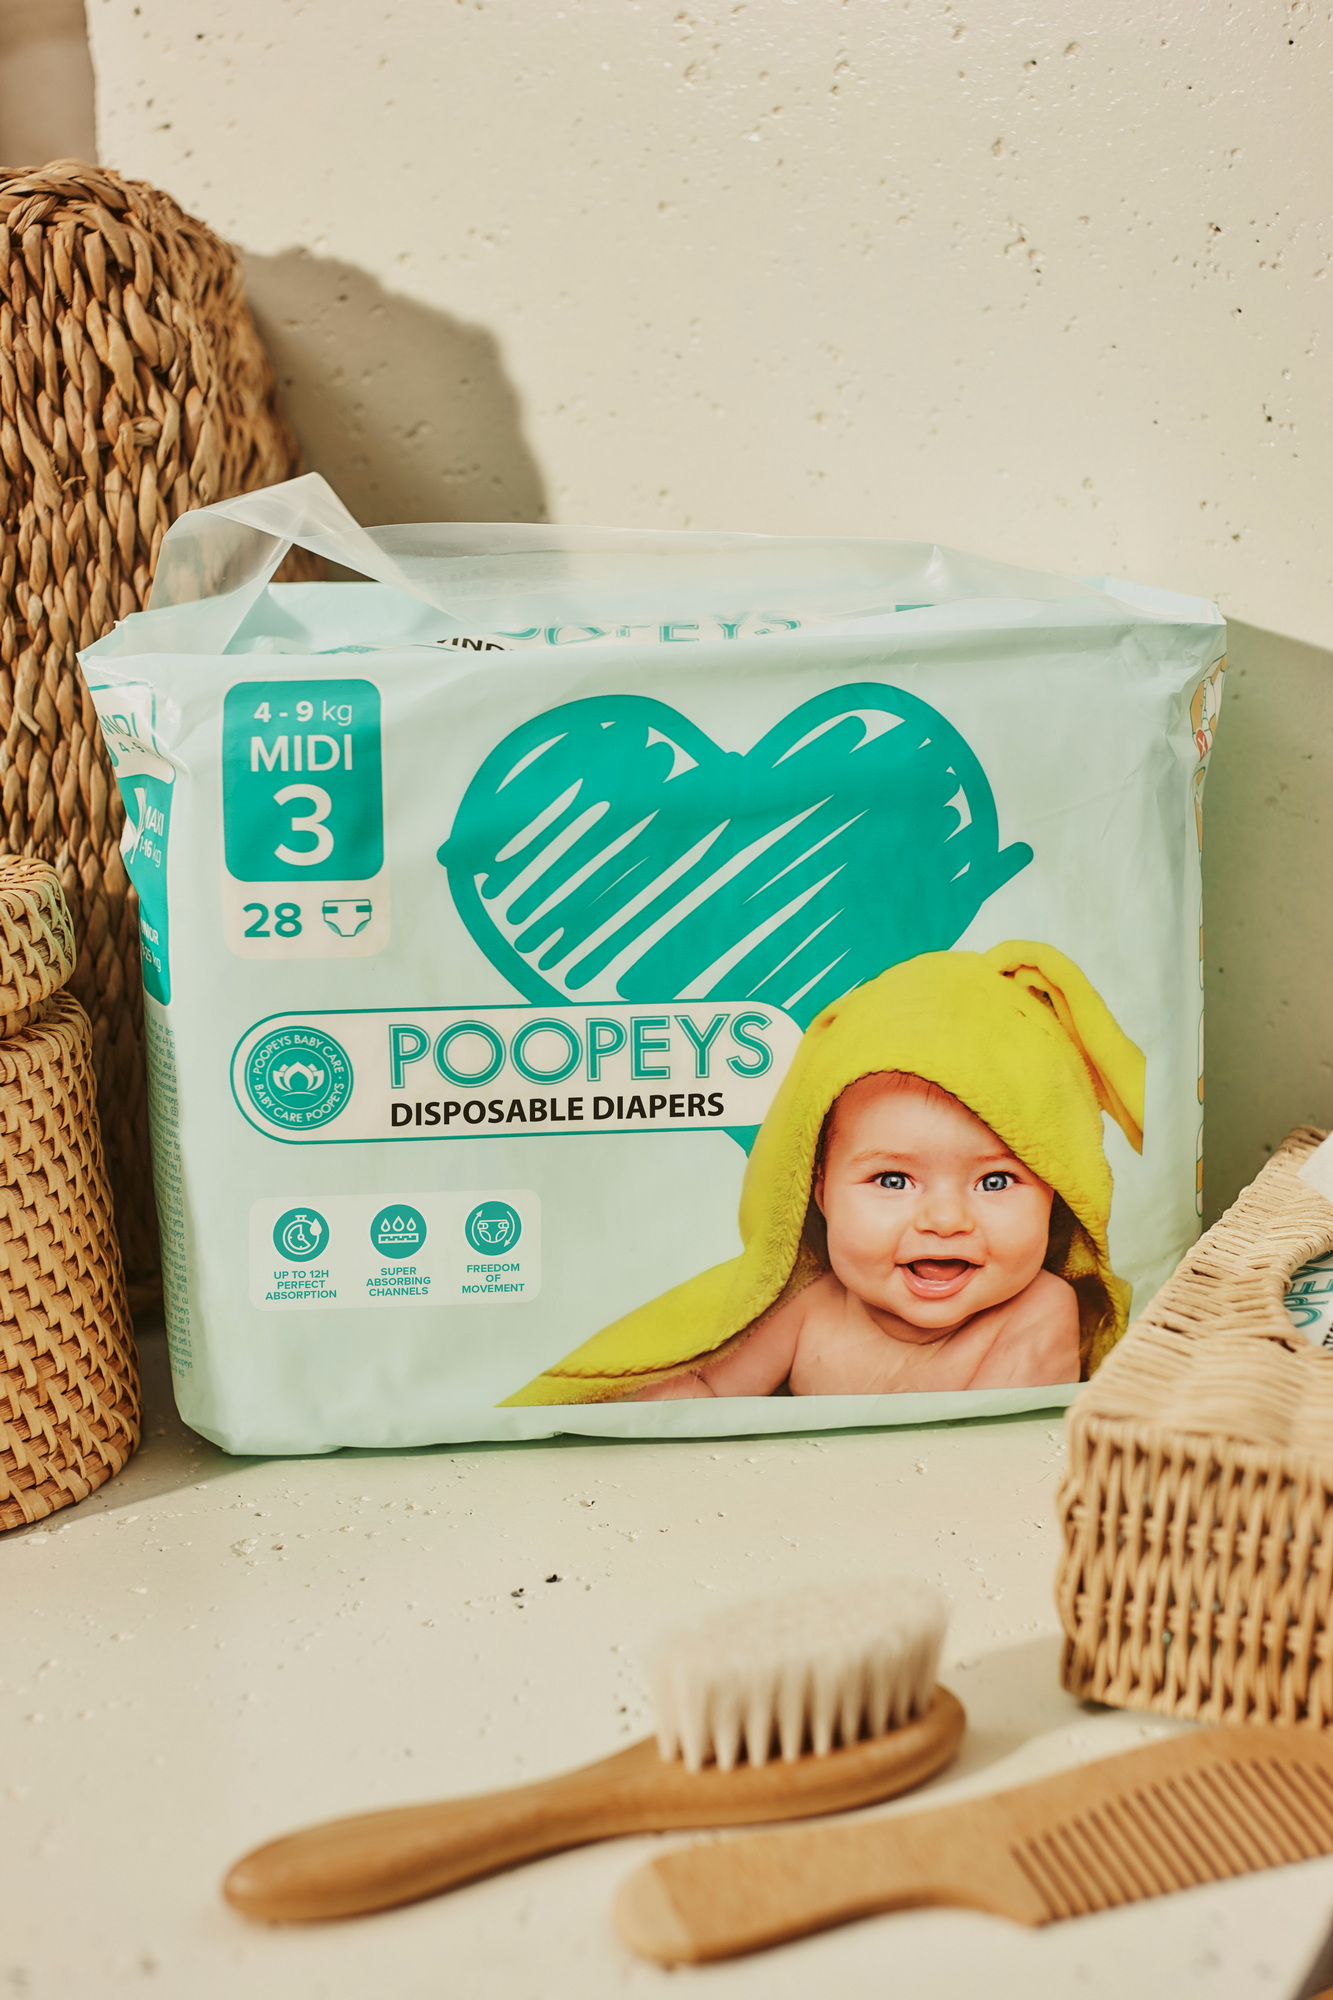 pampers active baby vs baby dry